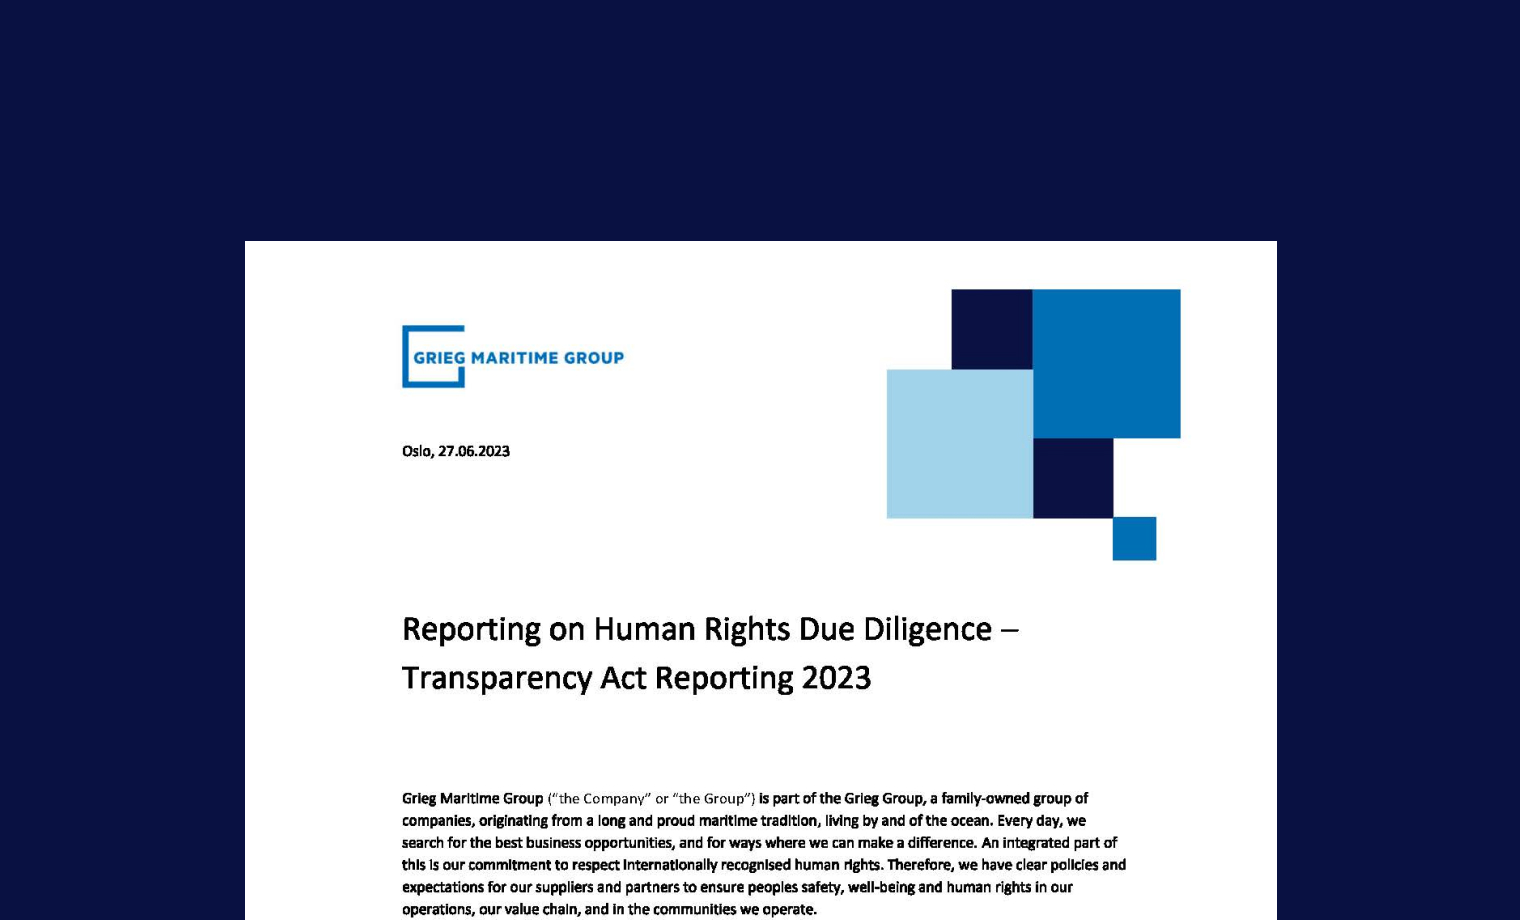 The transparency act report 2023.